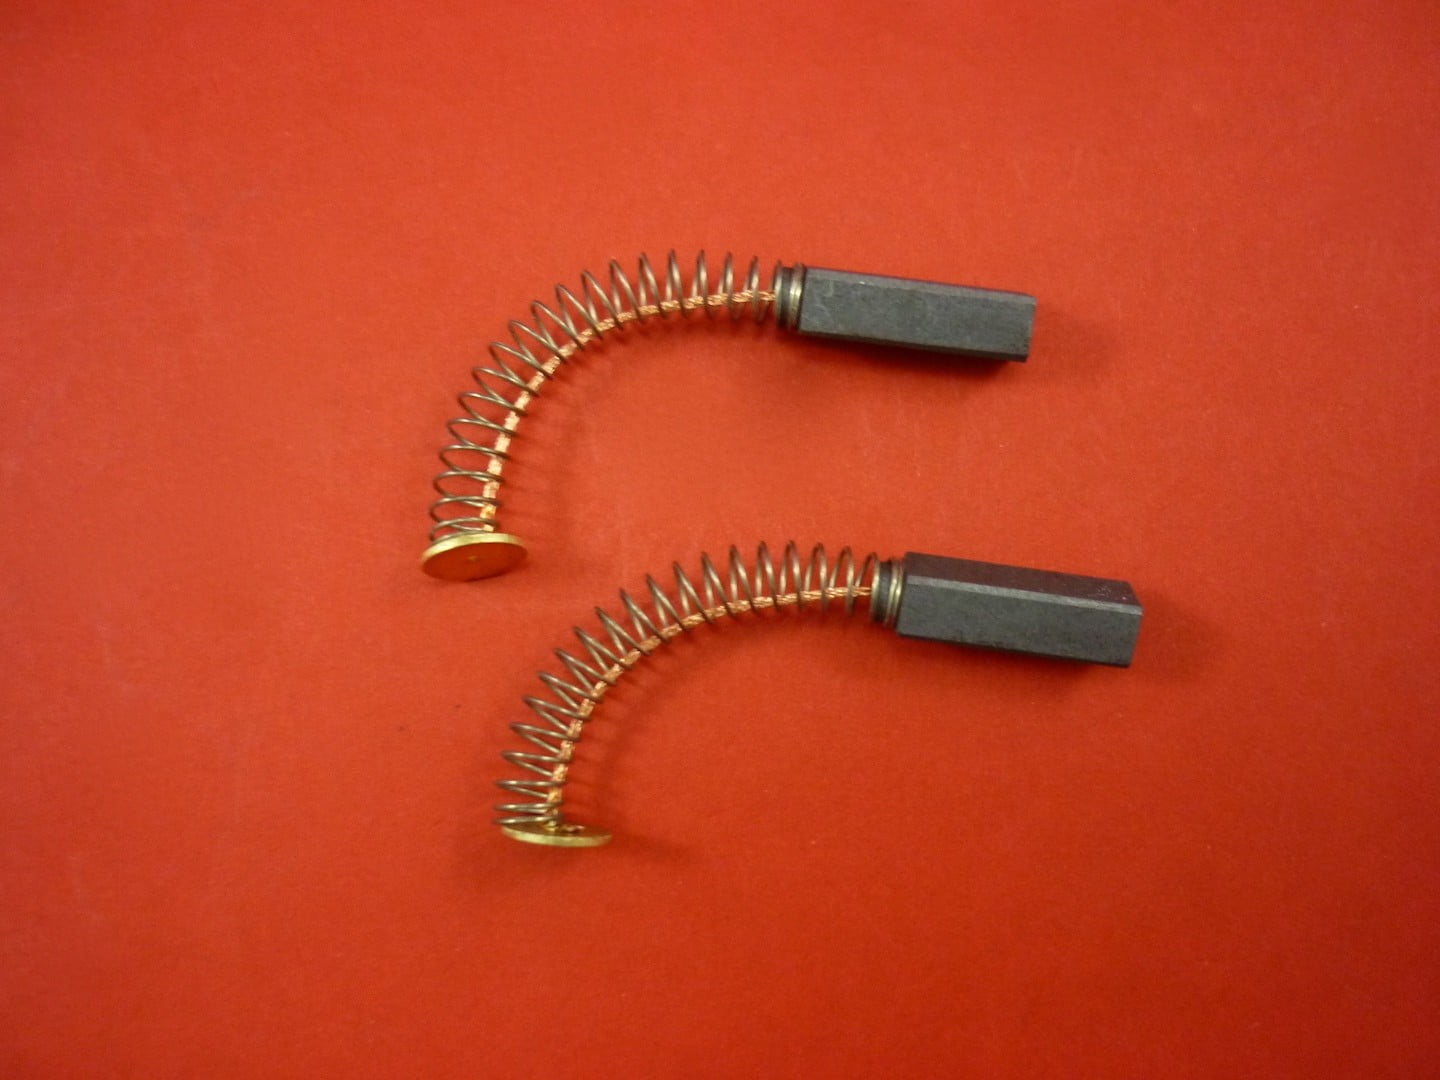 5mm x 4mm x 19mm 2 PAIR X KENWOOD CHEF A701 & A707 MOTOR REPAIR CARBON BRUSHES 